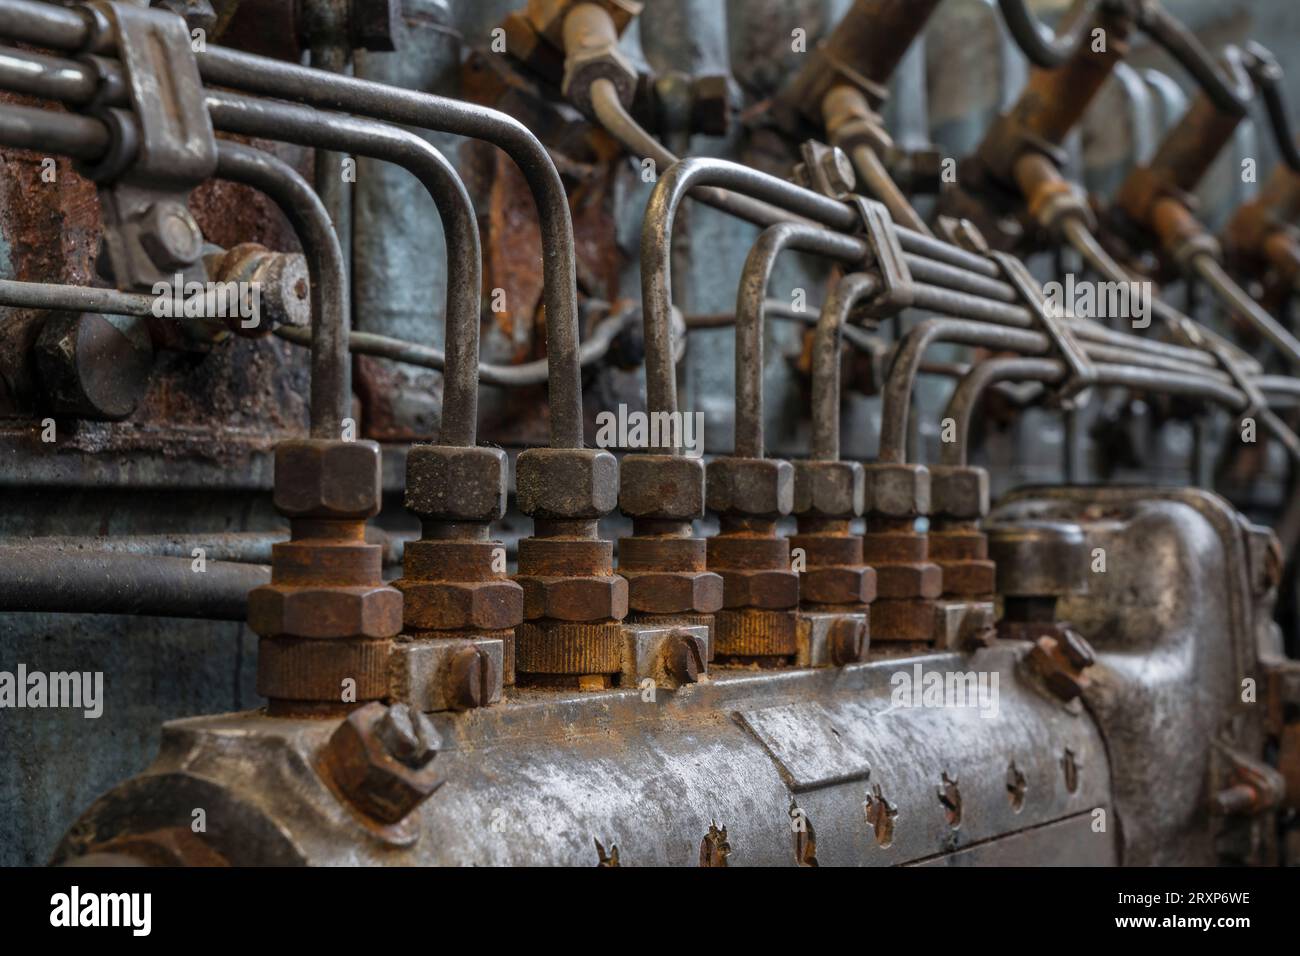 detail of an old diesel engine Stock Photo